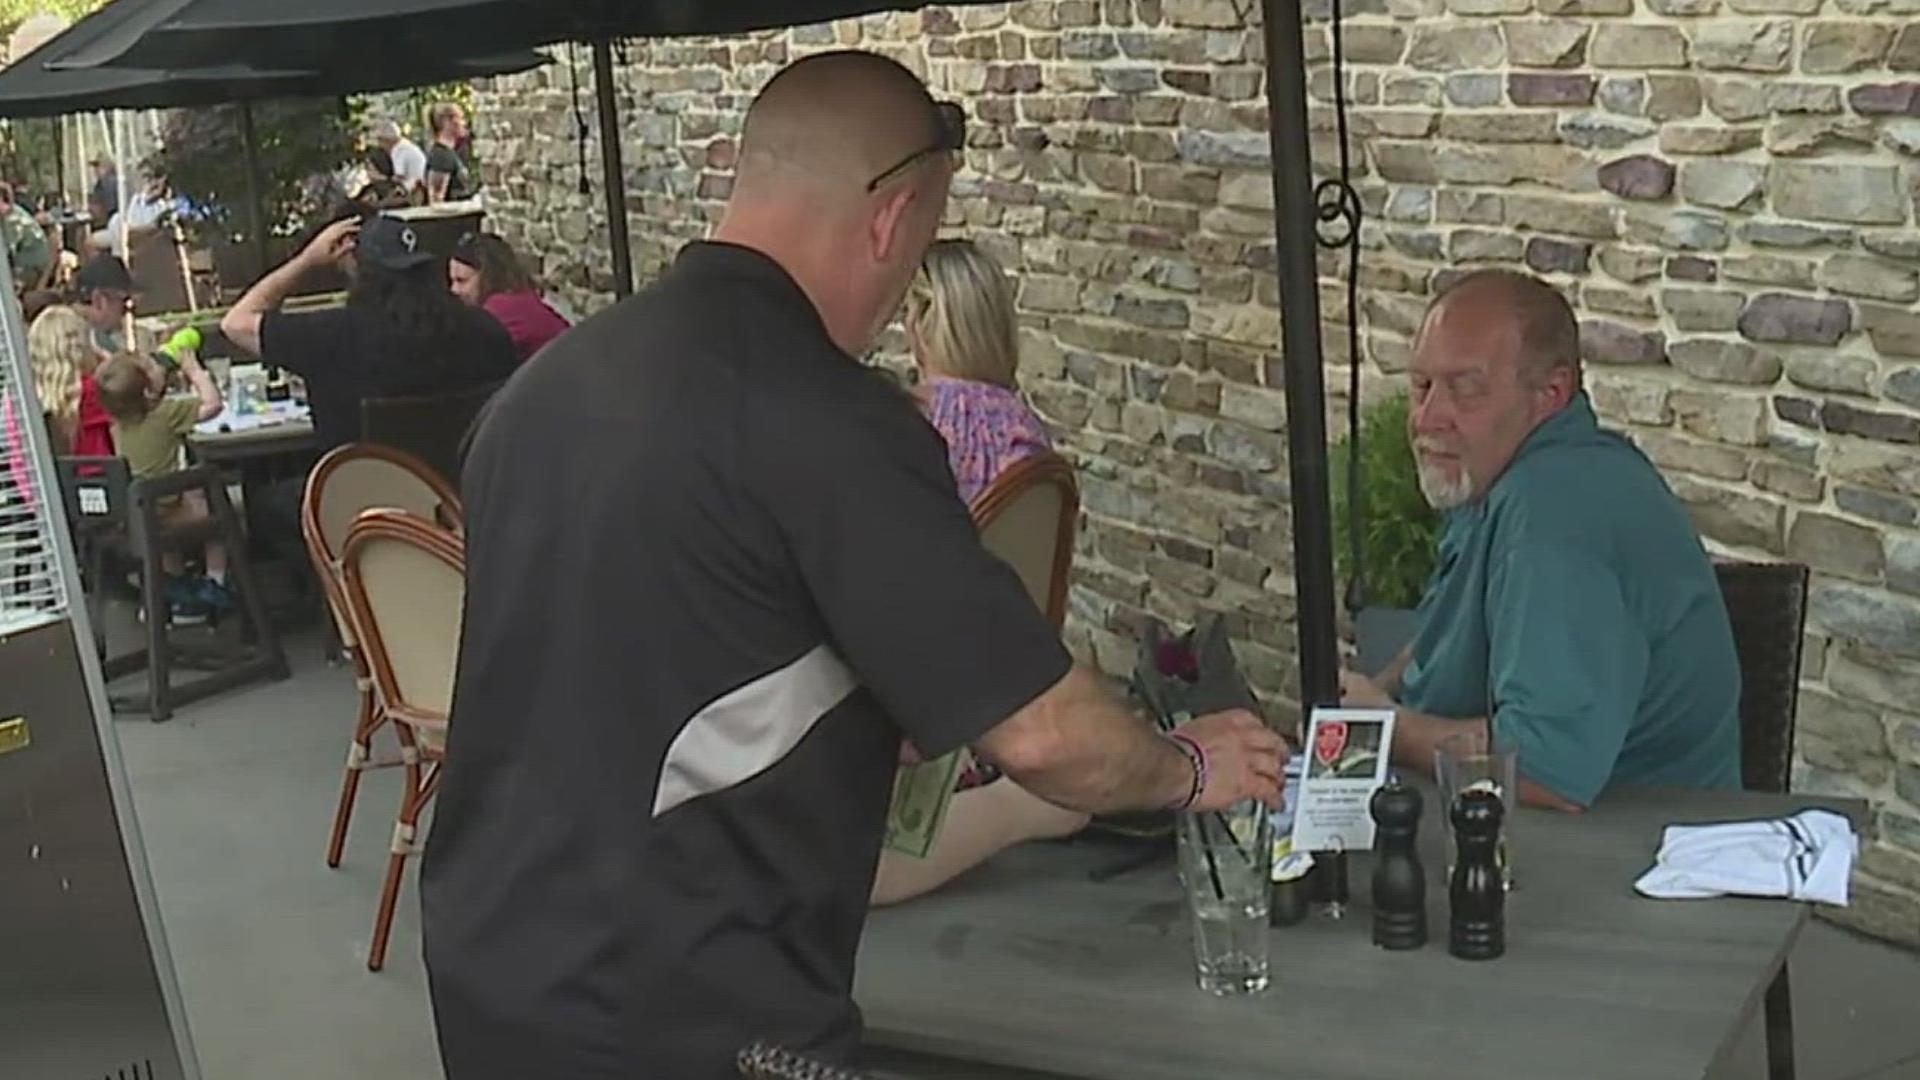 The event saw police officers from Lancaster County wait tables at Funck's Restaurant in Leola.